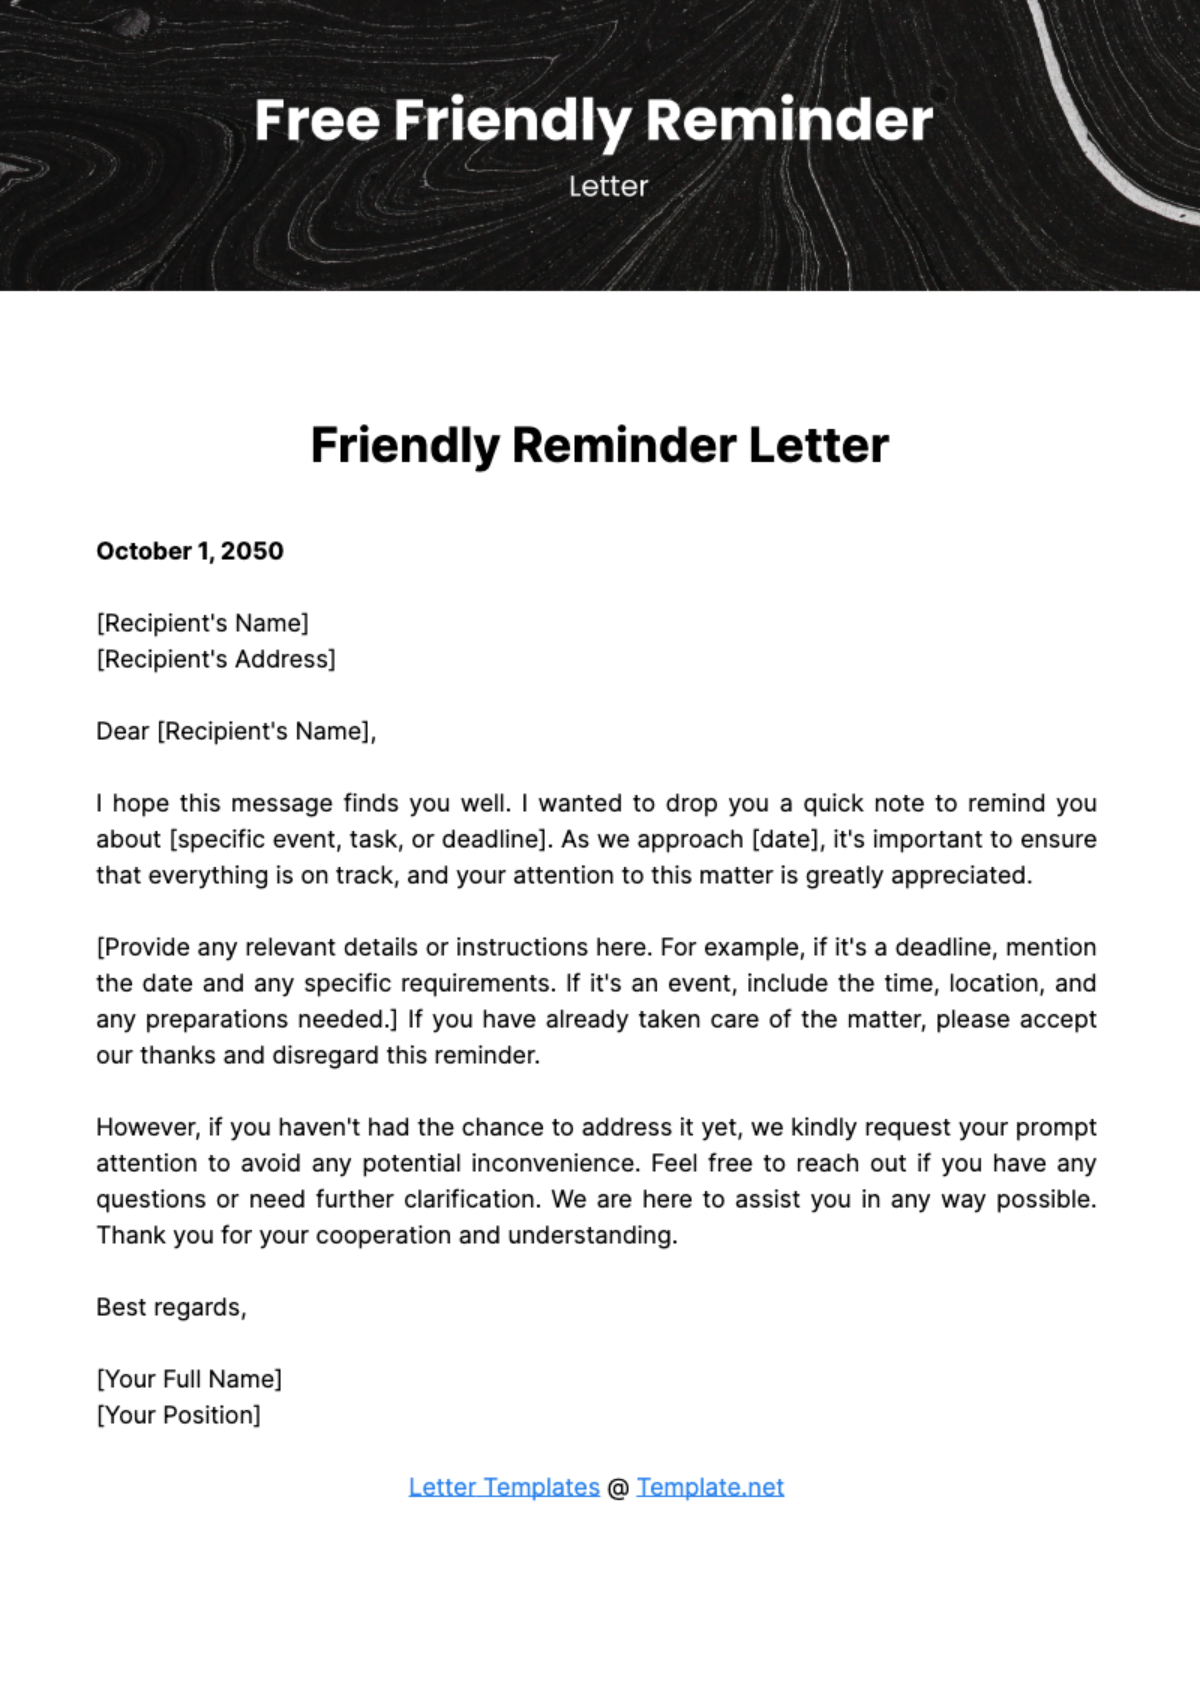 Free Friendly Reminder Letter Template